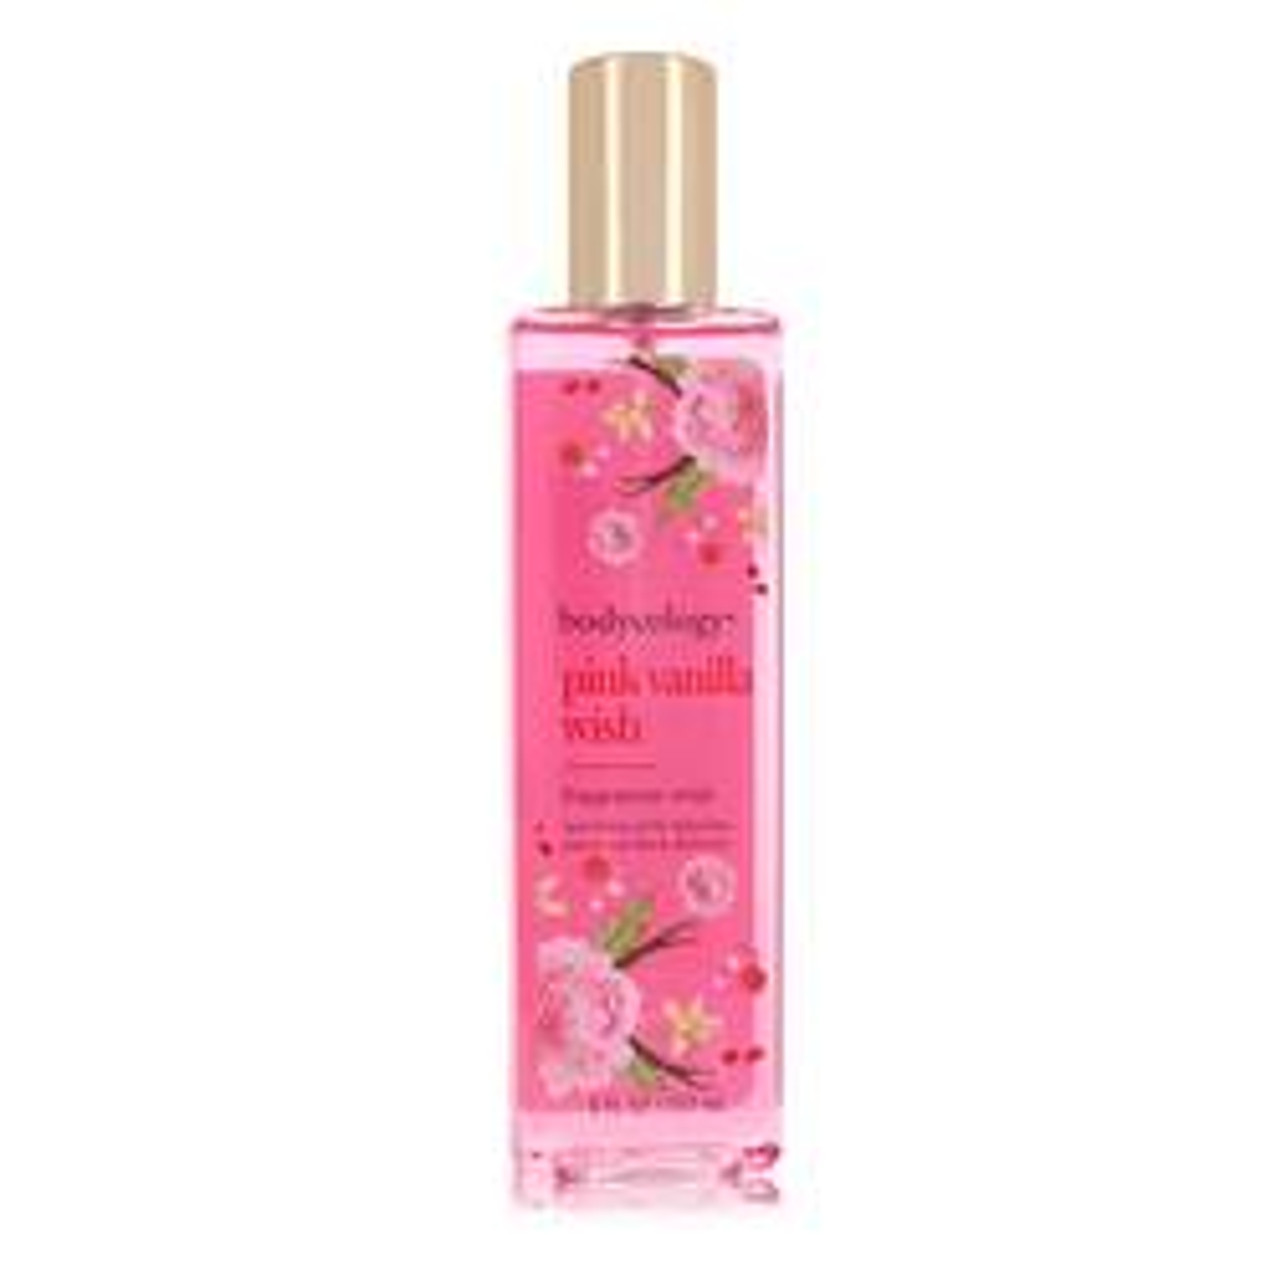 Bodycology Pink Vanilla Wish Perfume By Bodycology Fragrance Mist Spray 8 oz for Women - *Pre-Order